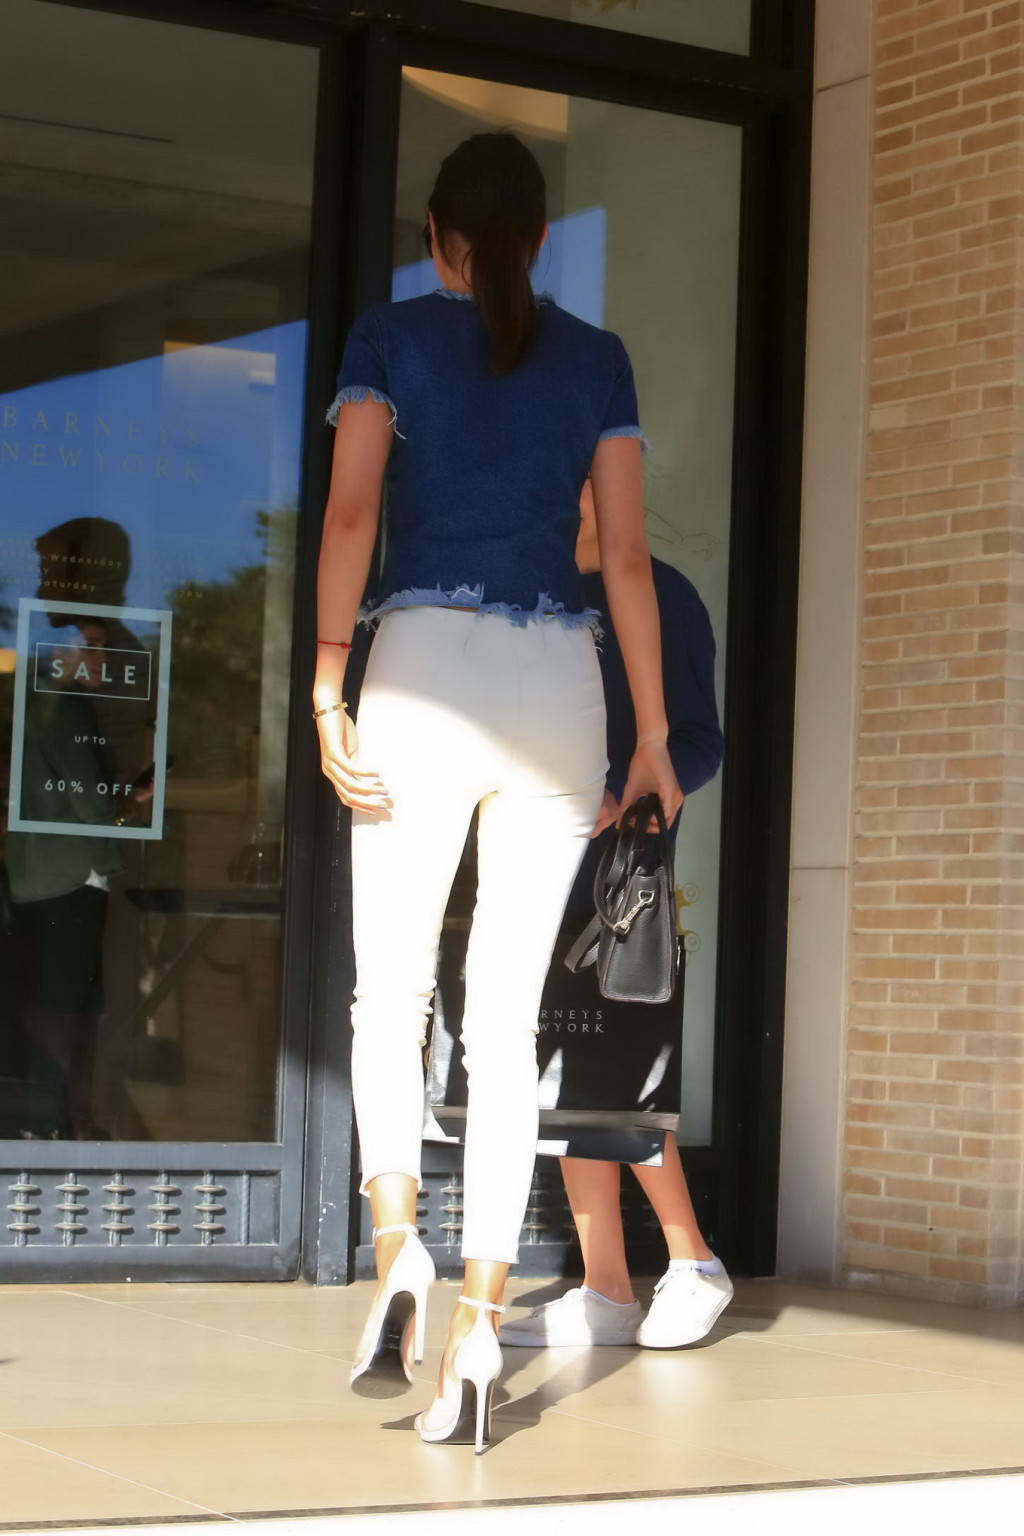 Kendall Jenner showing ass in tight white pants and denim top while shopping in  #75177162